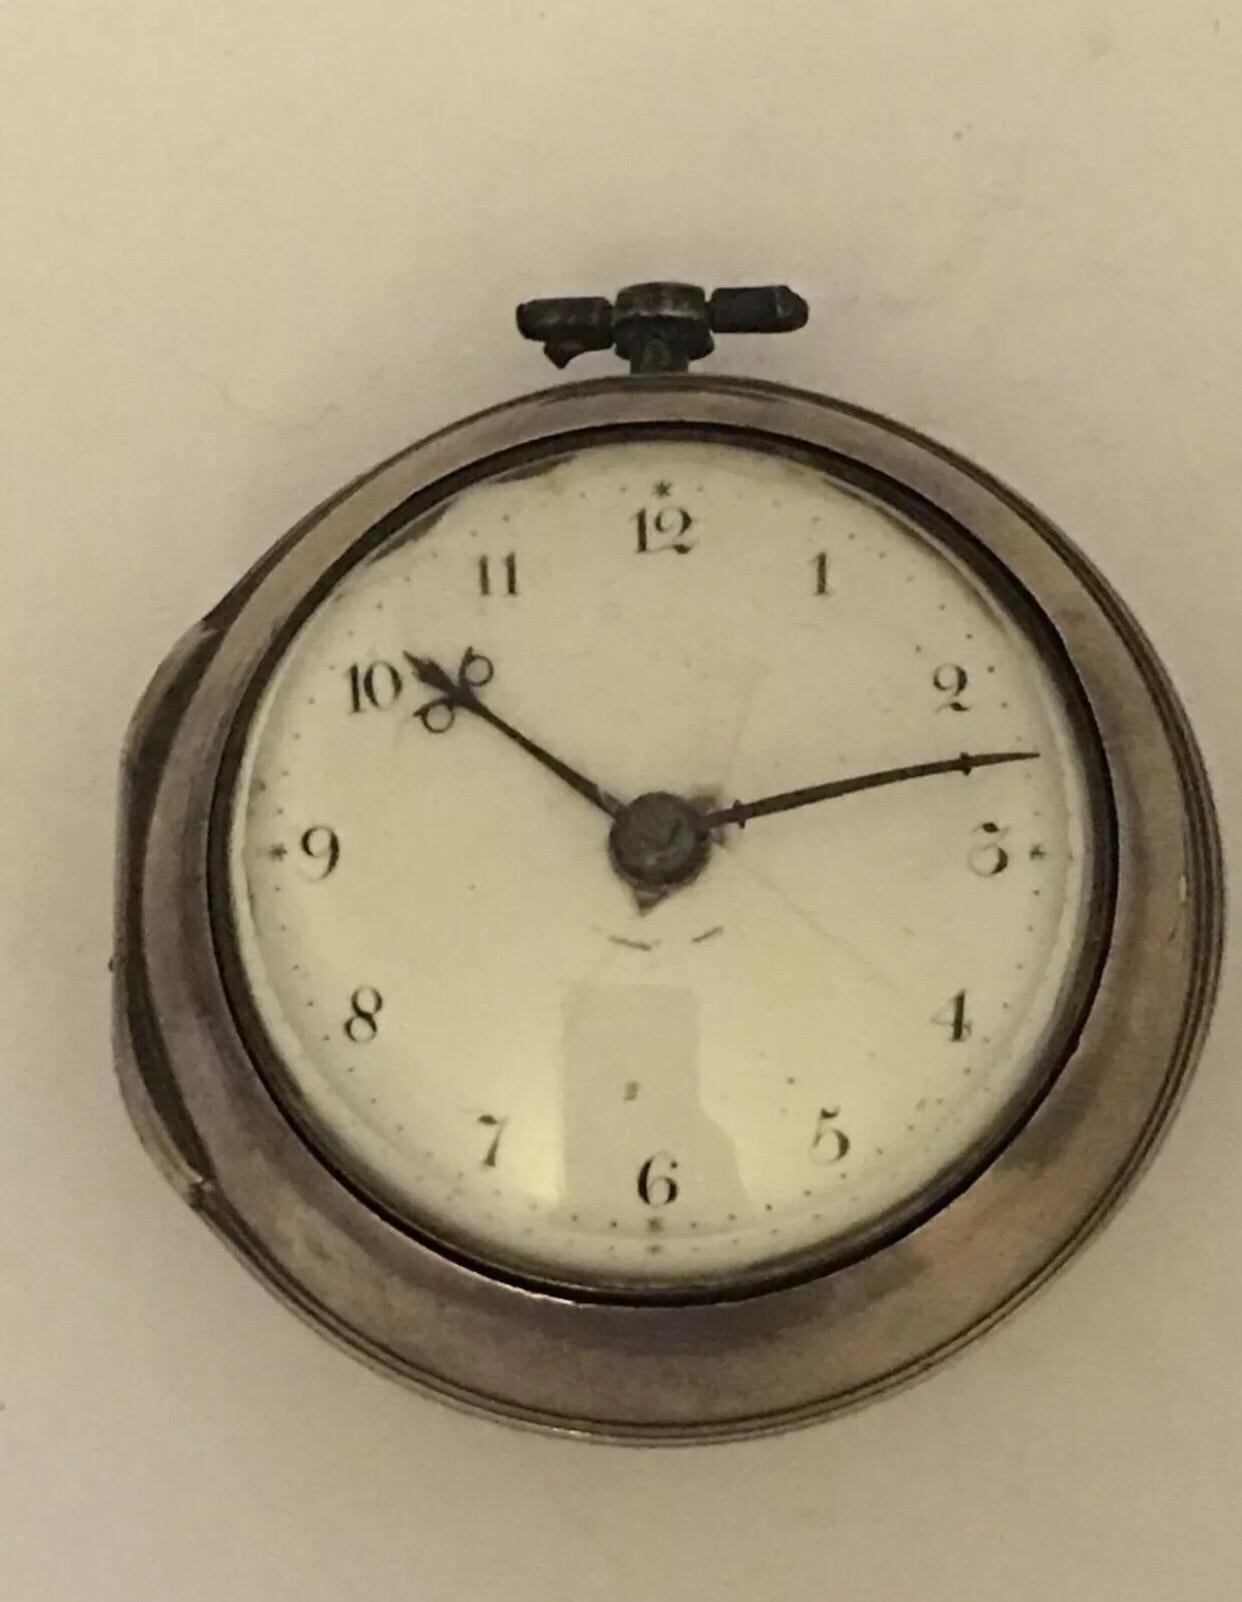 Early rare Verge Fusee Silver Pocket Watch Signed Thomas Maston, London.

This watch is working and ticking well. However I cannot guarantee the time accuracy (approx. 20 mins. slow a day)Visible dent on the back case as shown on the photo, visible